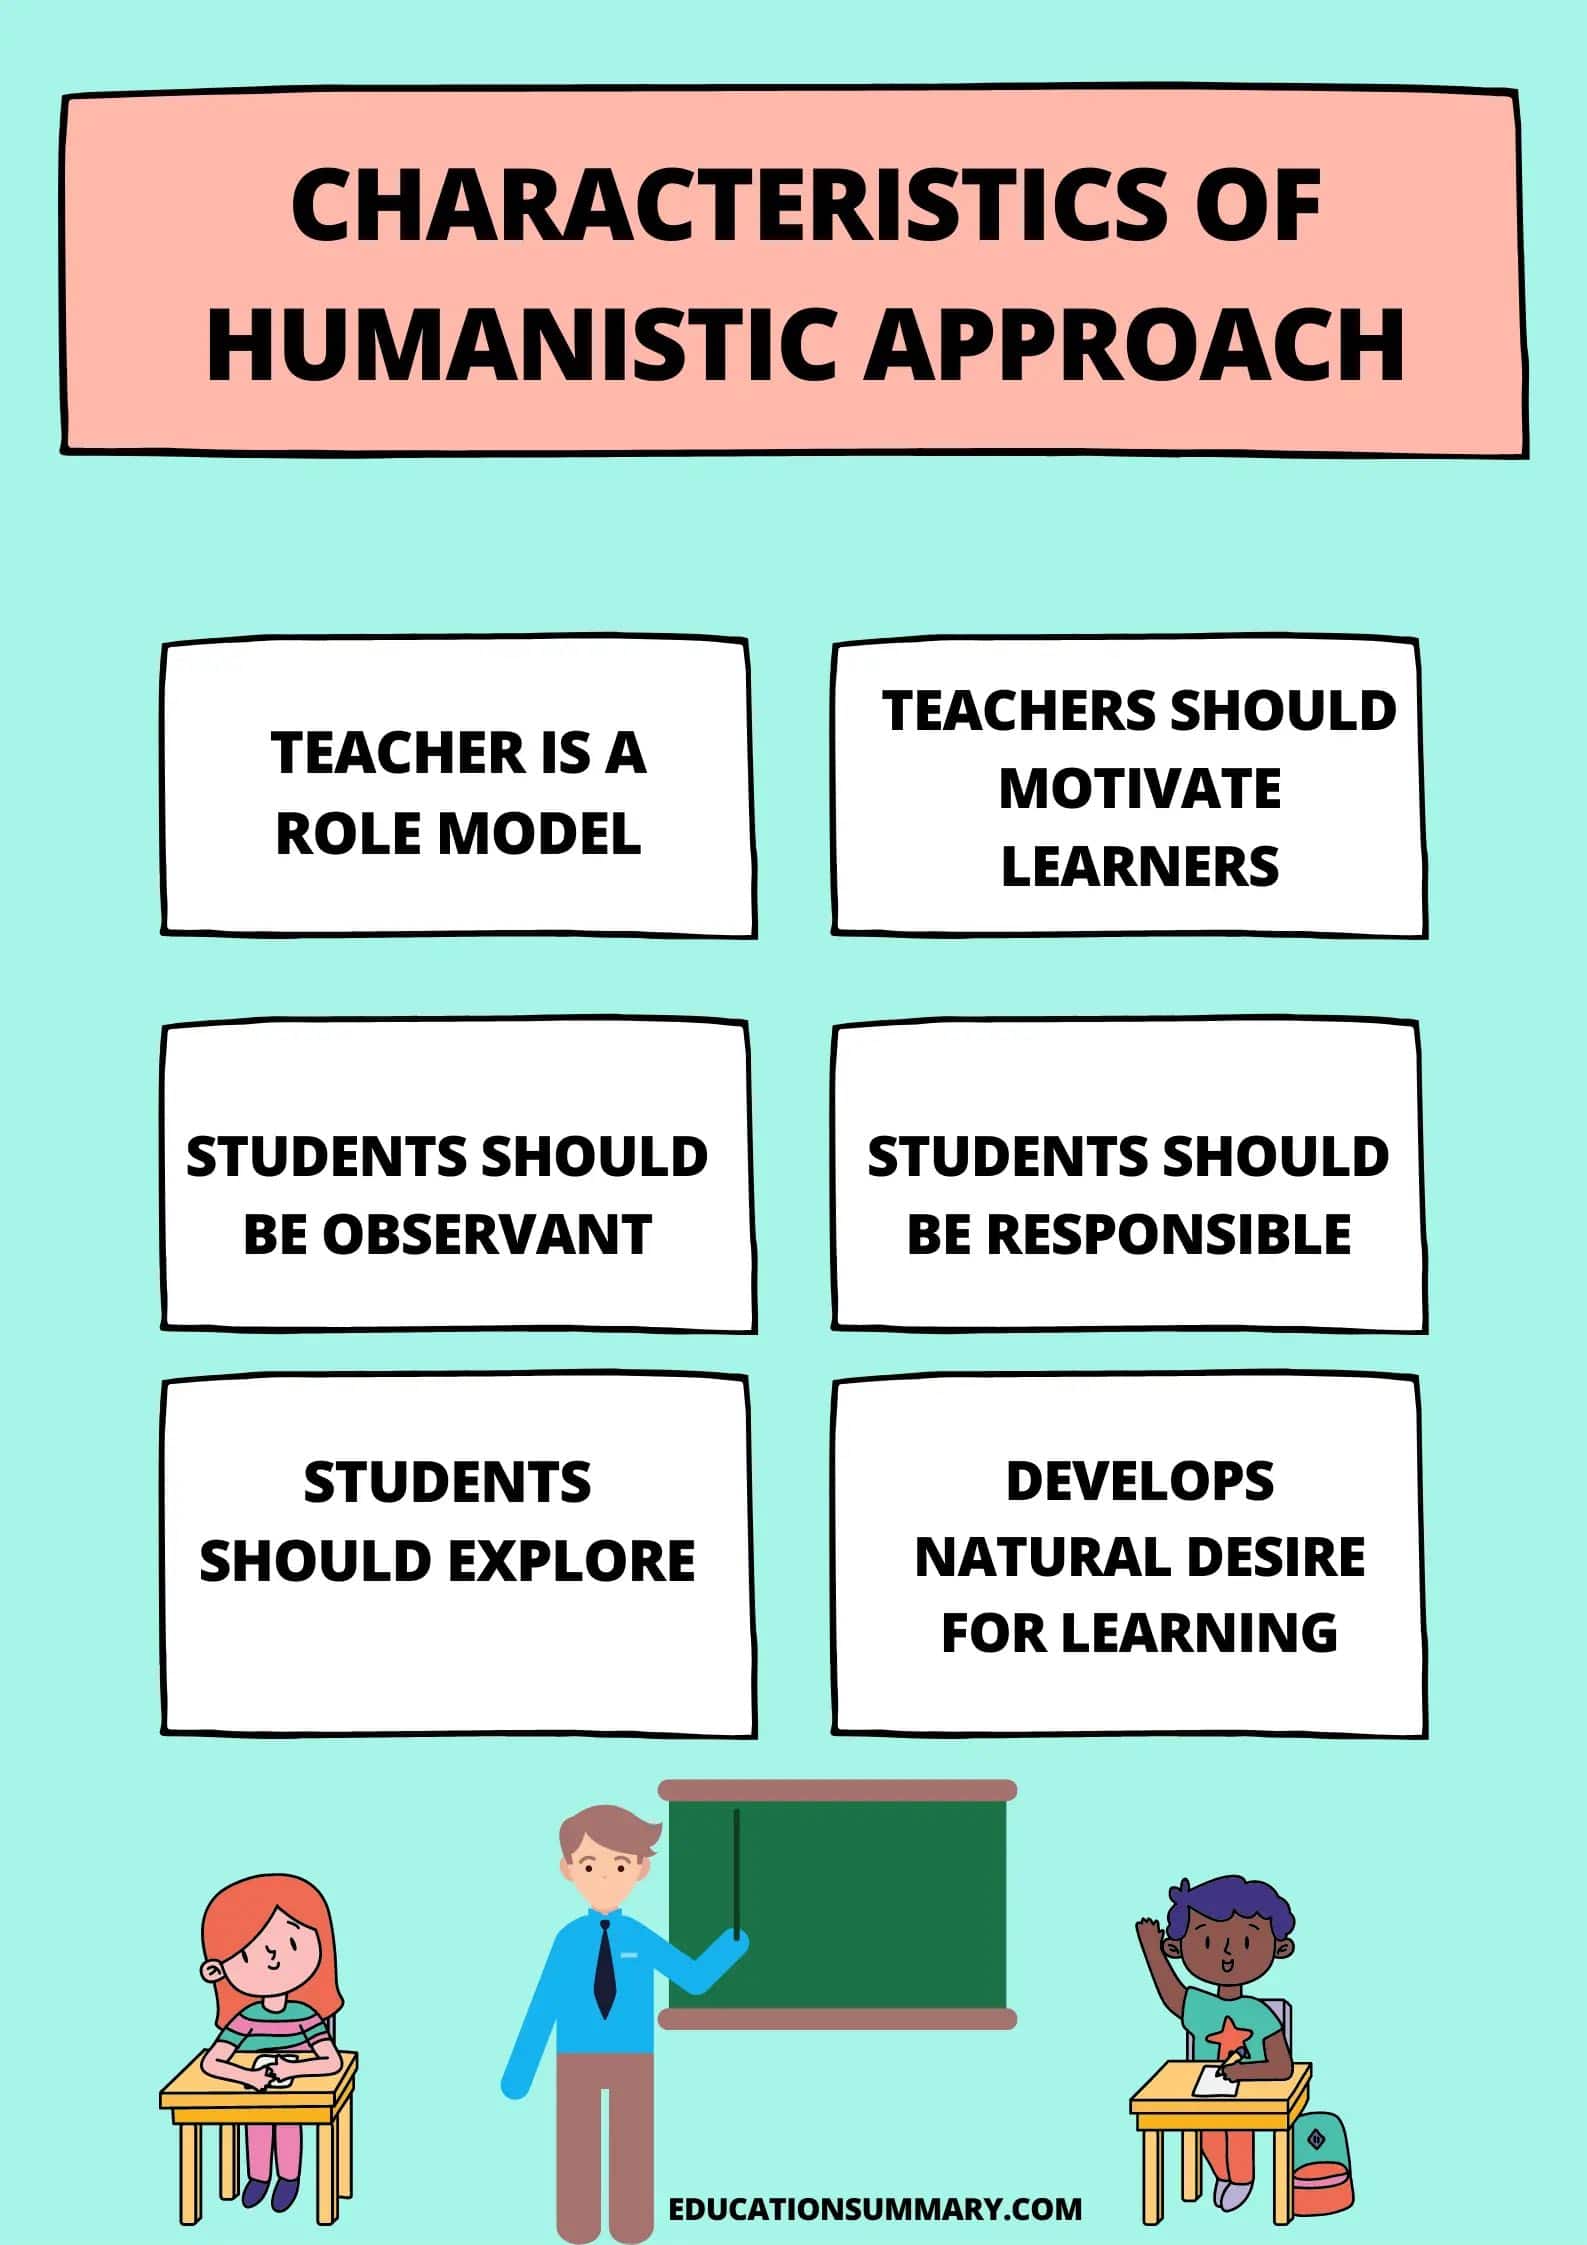 Humanistic Approach in Schools